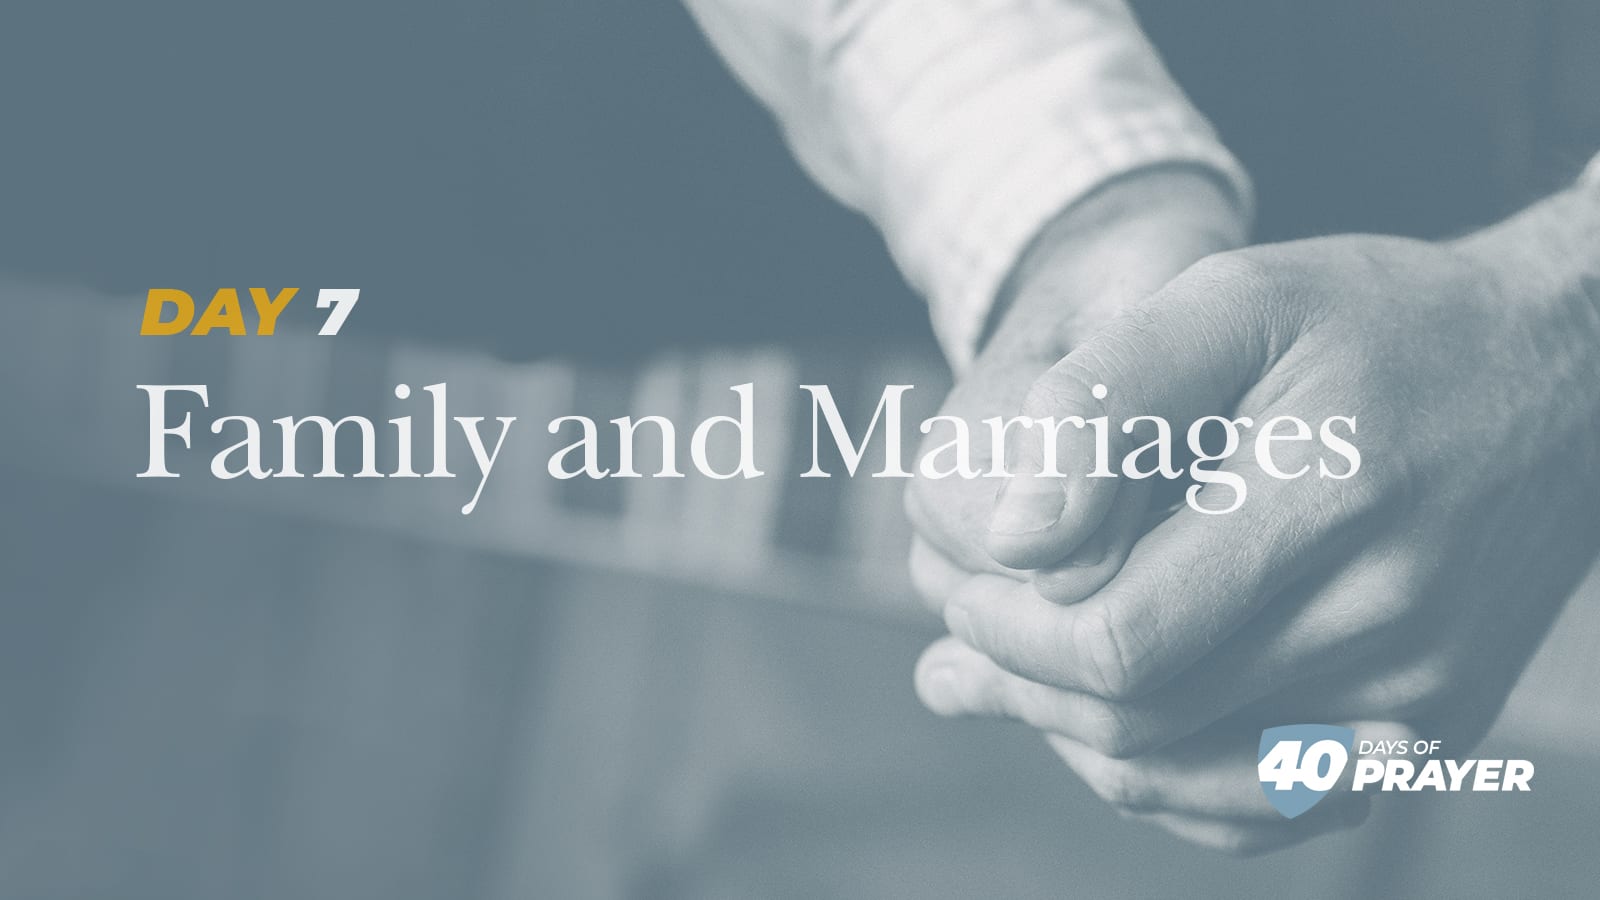 40 days of prayer for Family and Marriages